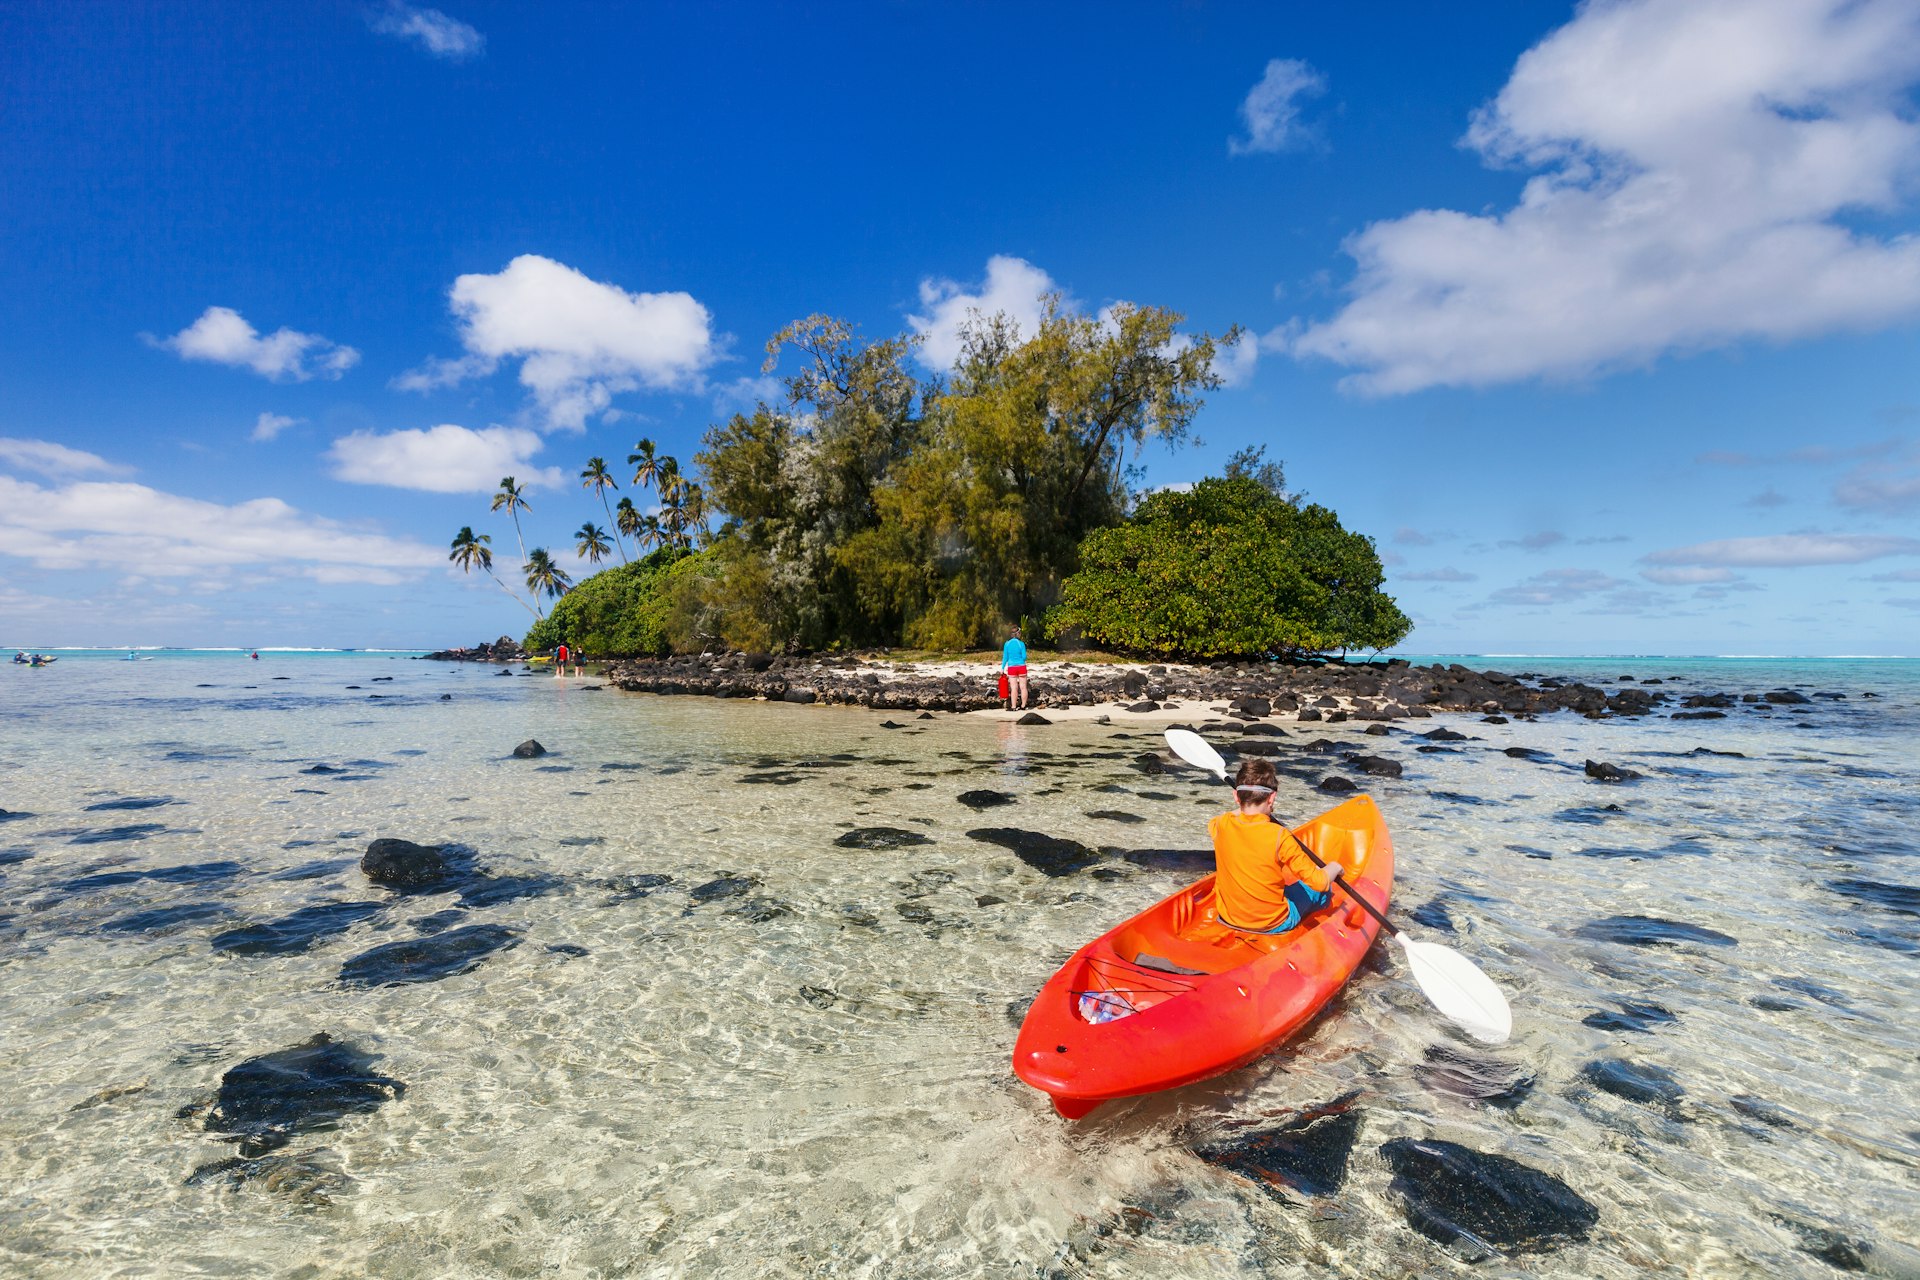 Teenage boy on a kayak in the lagoon in the Cook Islands